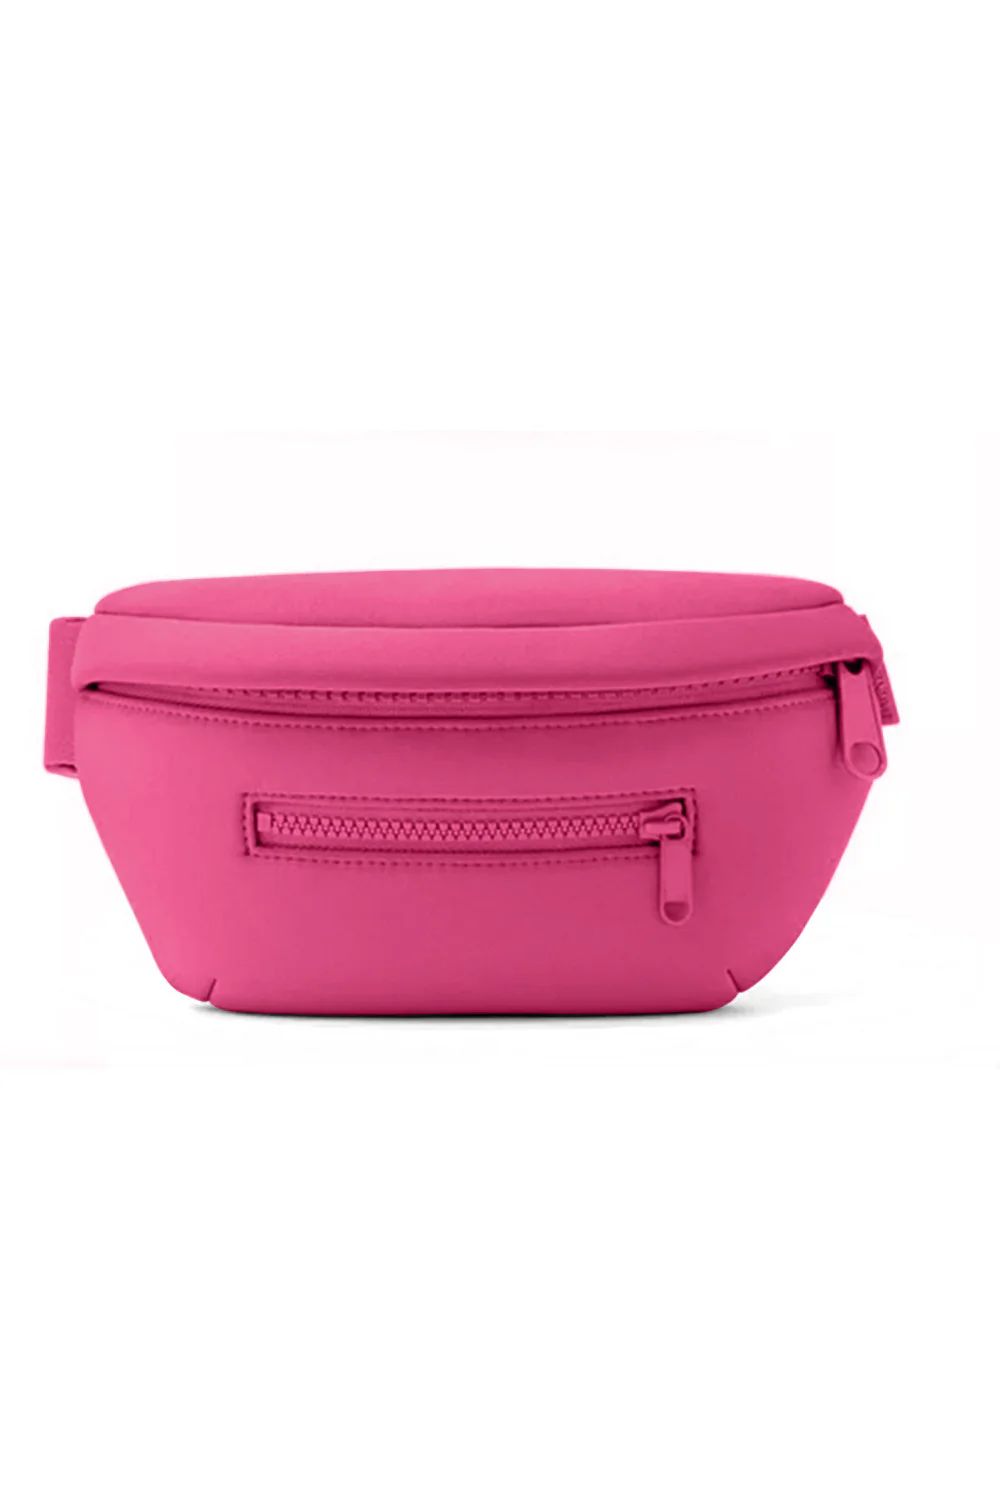 Neoprene Belt Bag - Pink | The Styled Collection